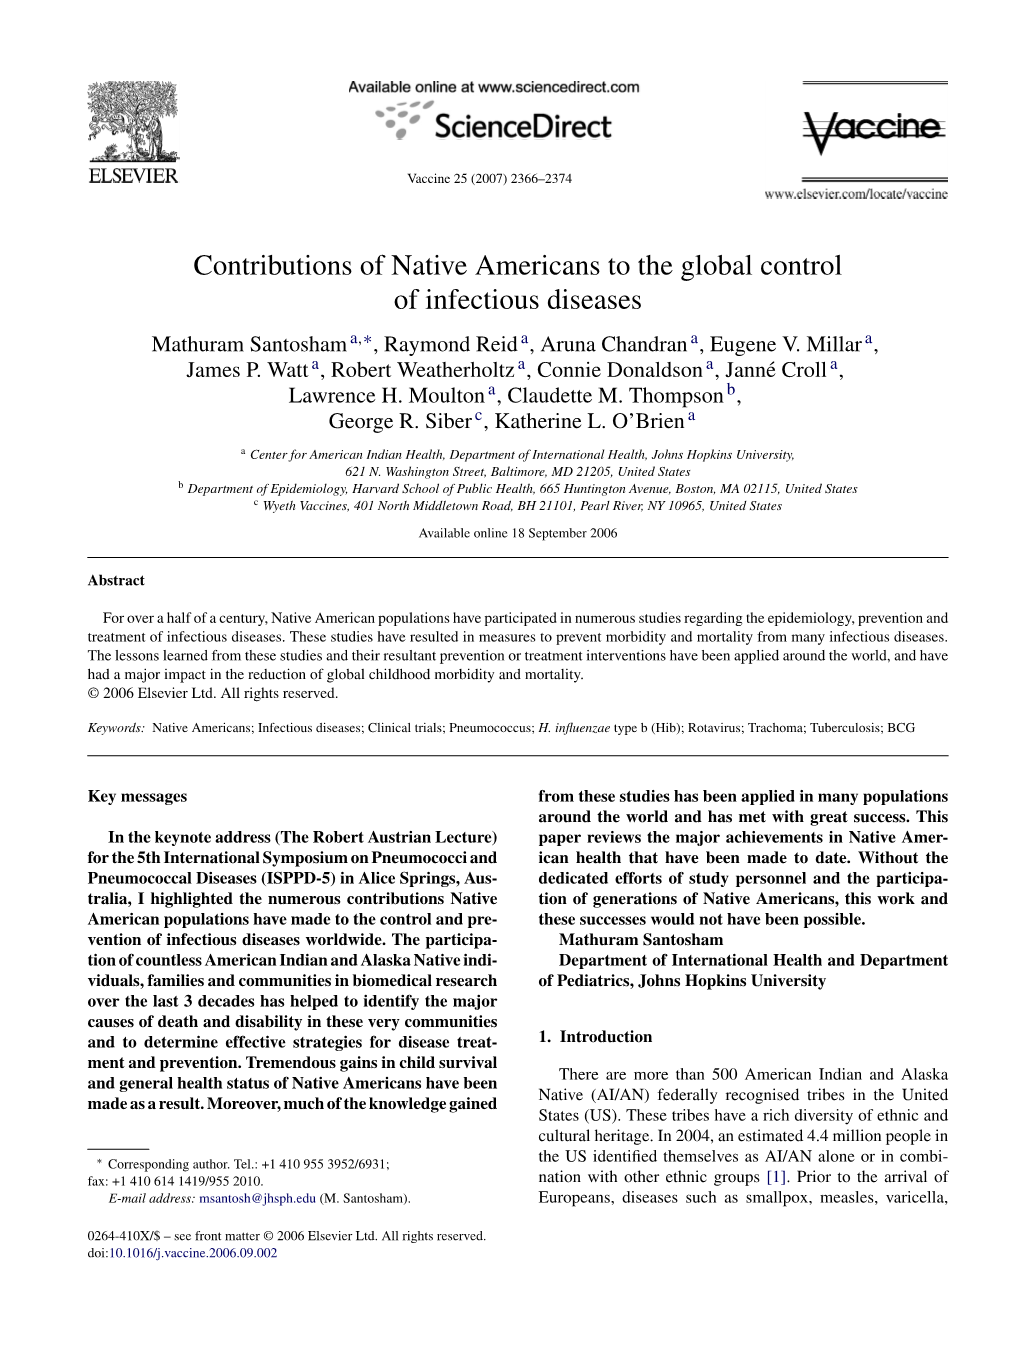 Contributions of Native Americans to the Global Control of Infectious Diseases Mathuram Santosham A,∗, Raymond Reid A, Aruna Chandran A, Eugene V